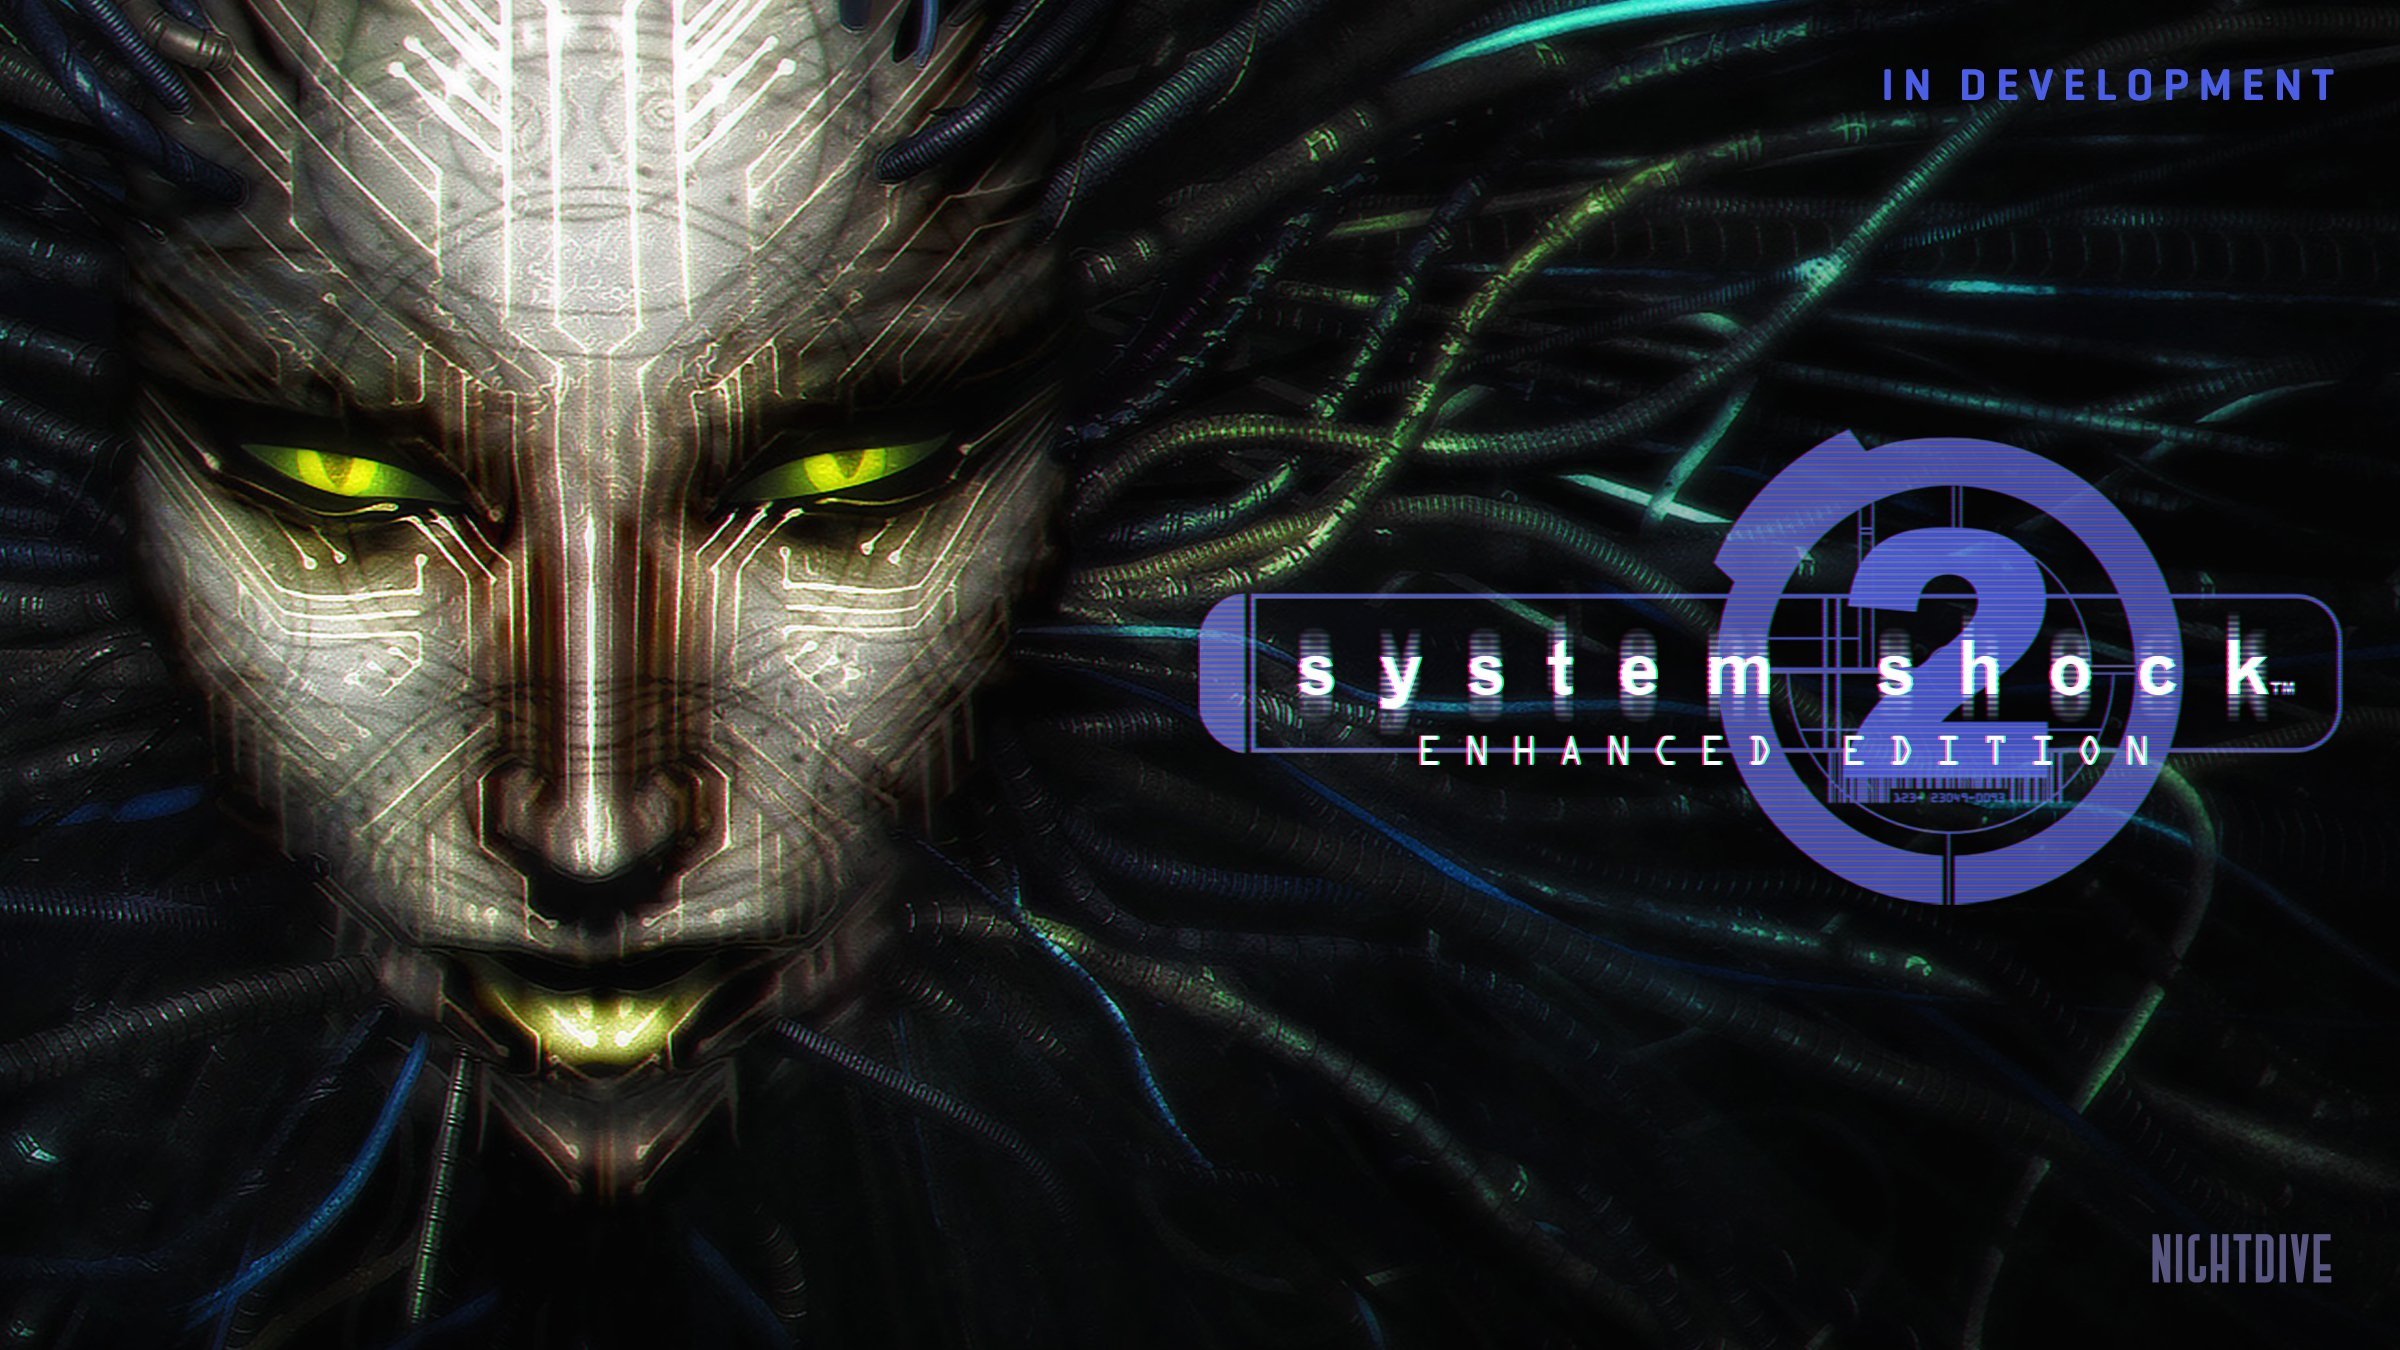 System shock 2 for gaming pc revealed to be playable in VR mode.